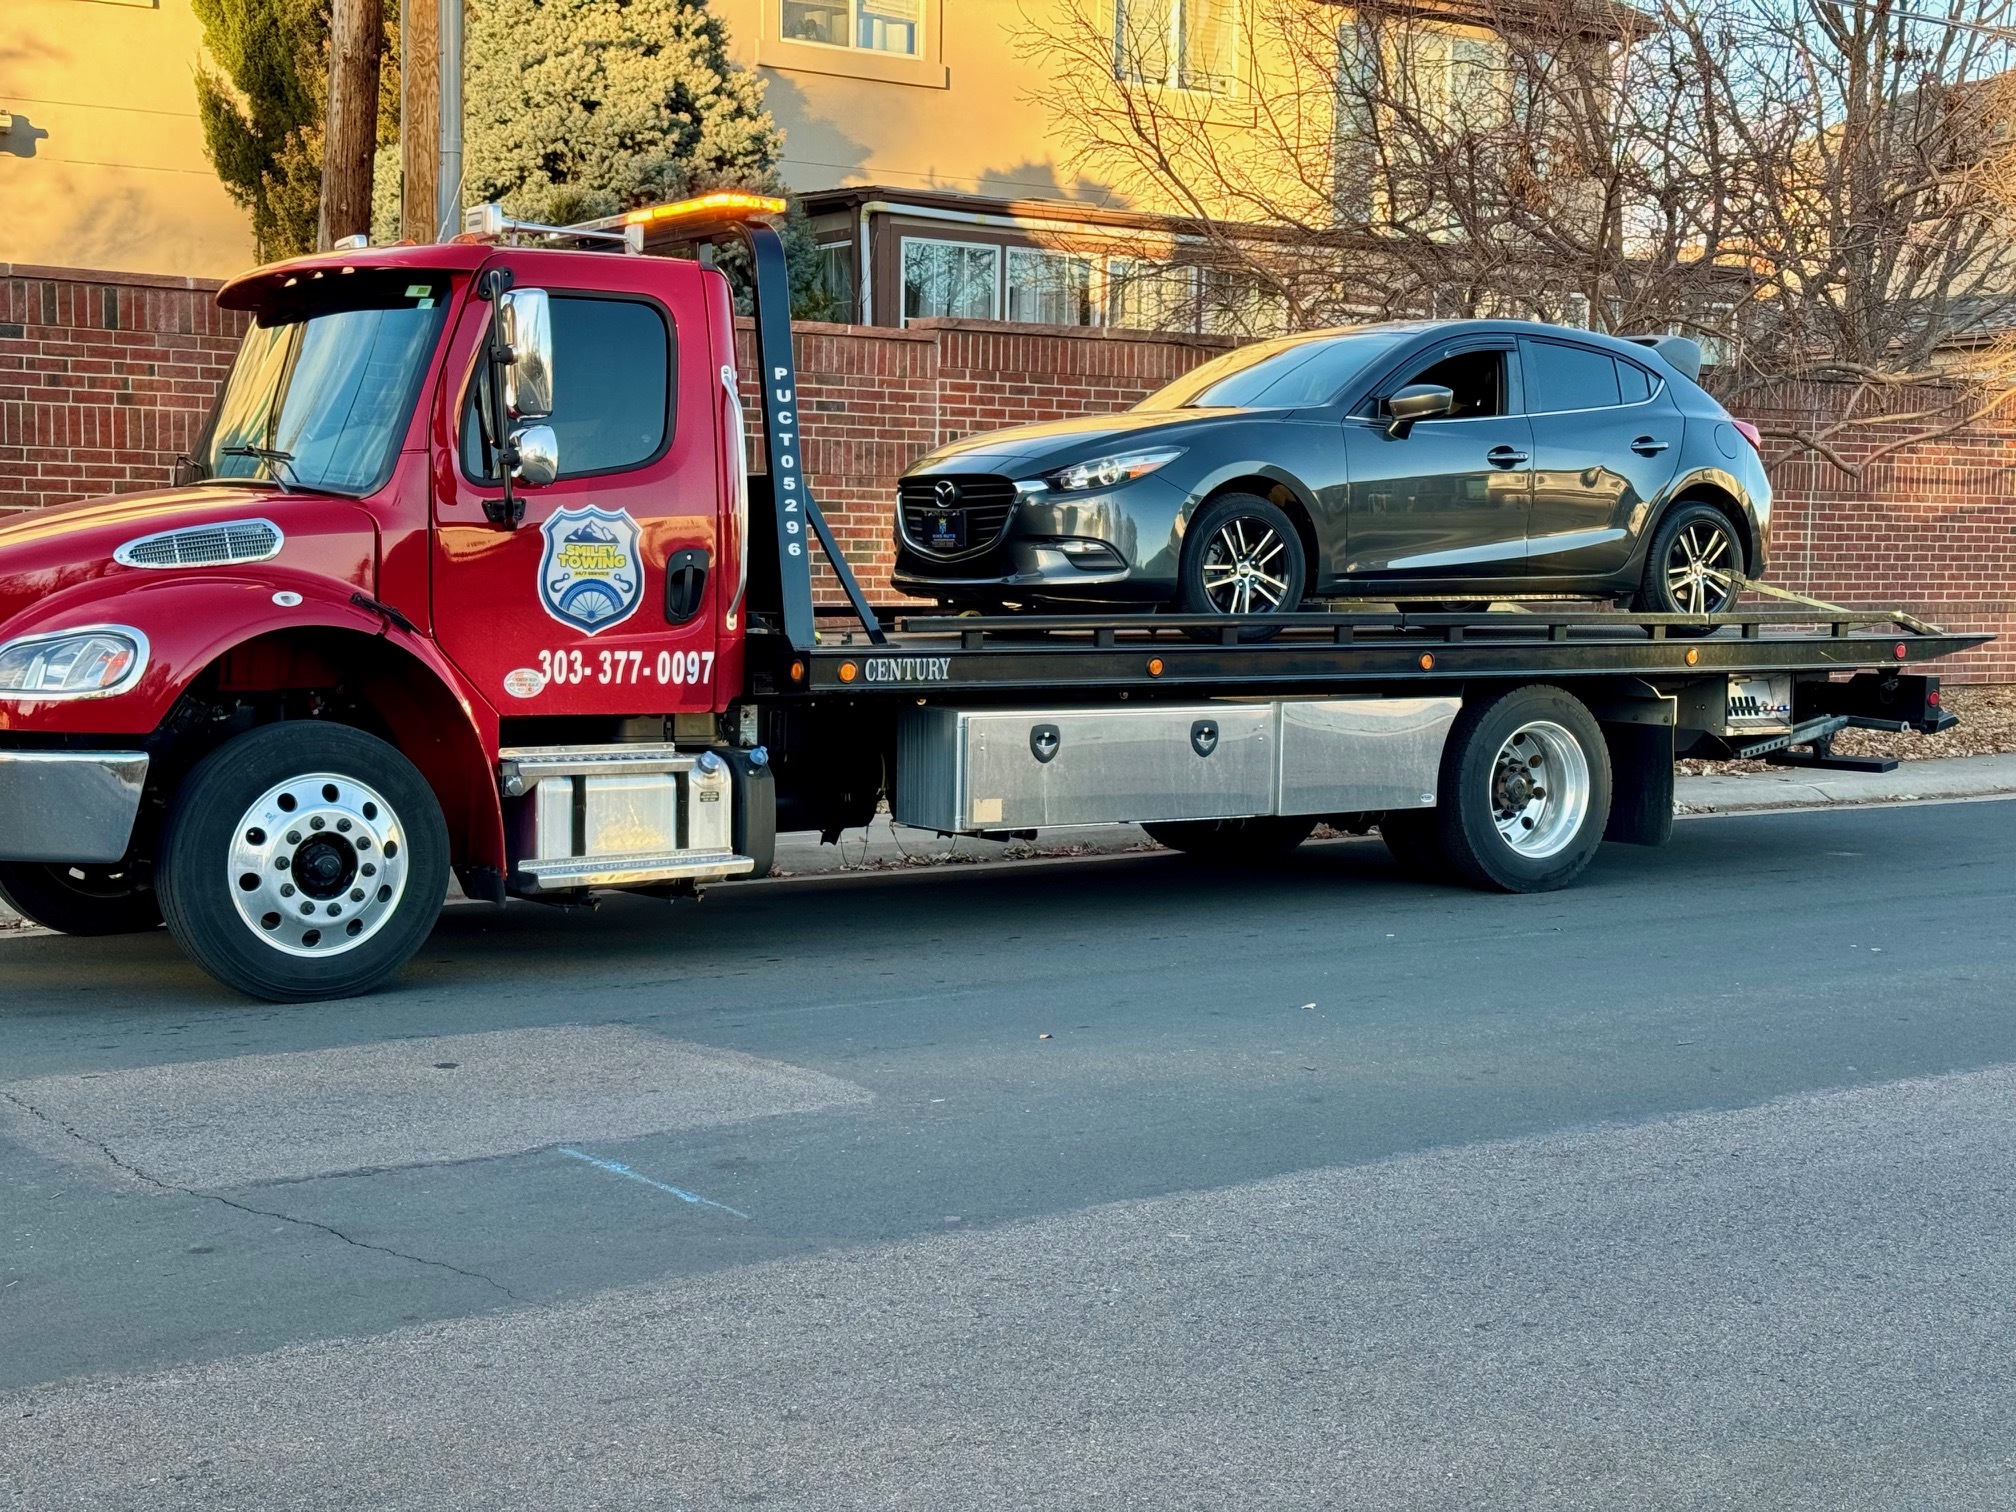 this image shows towing services in Wheat Ridge, CO